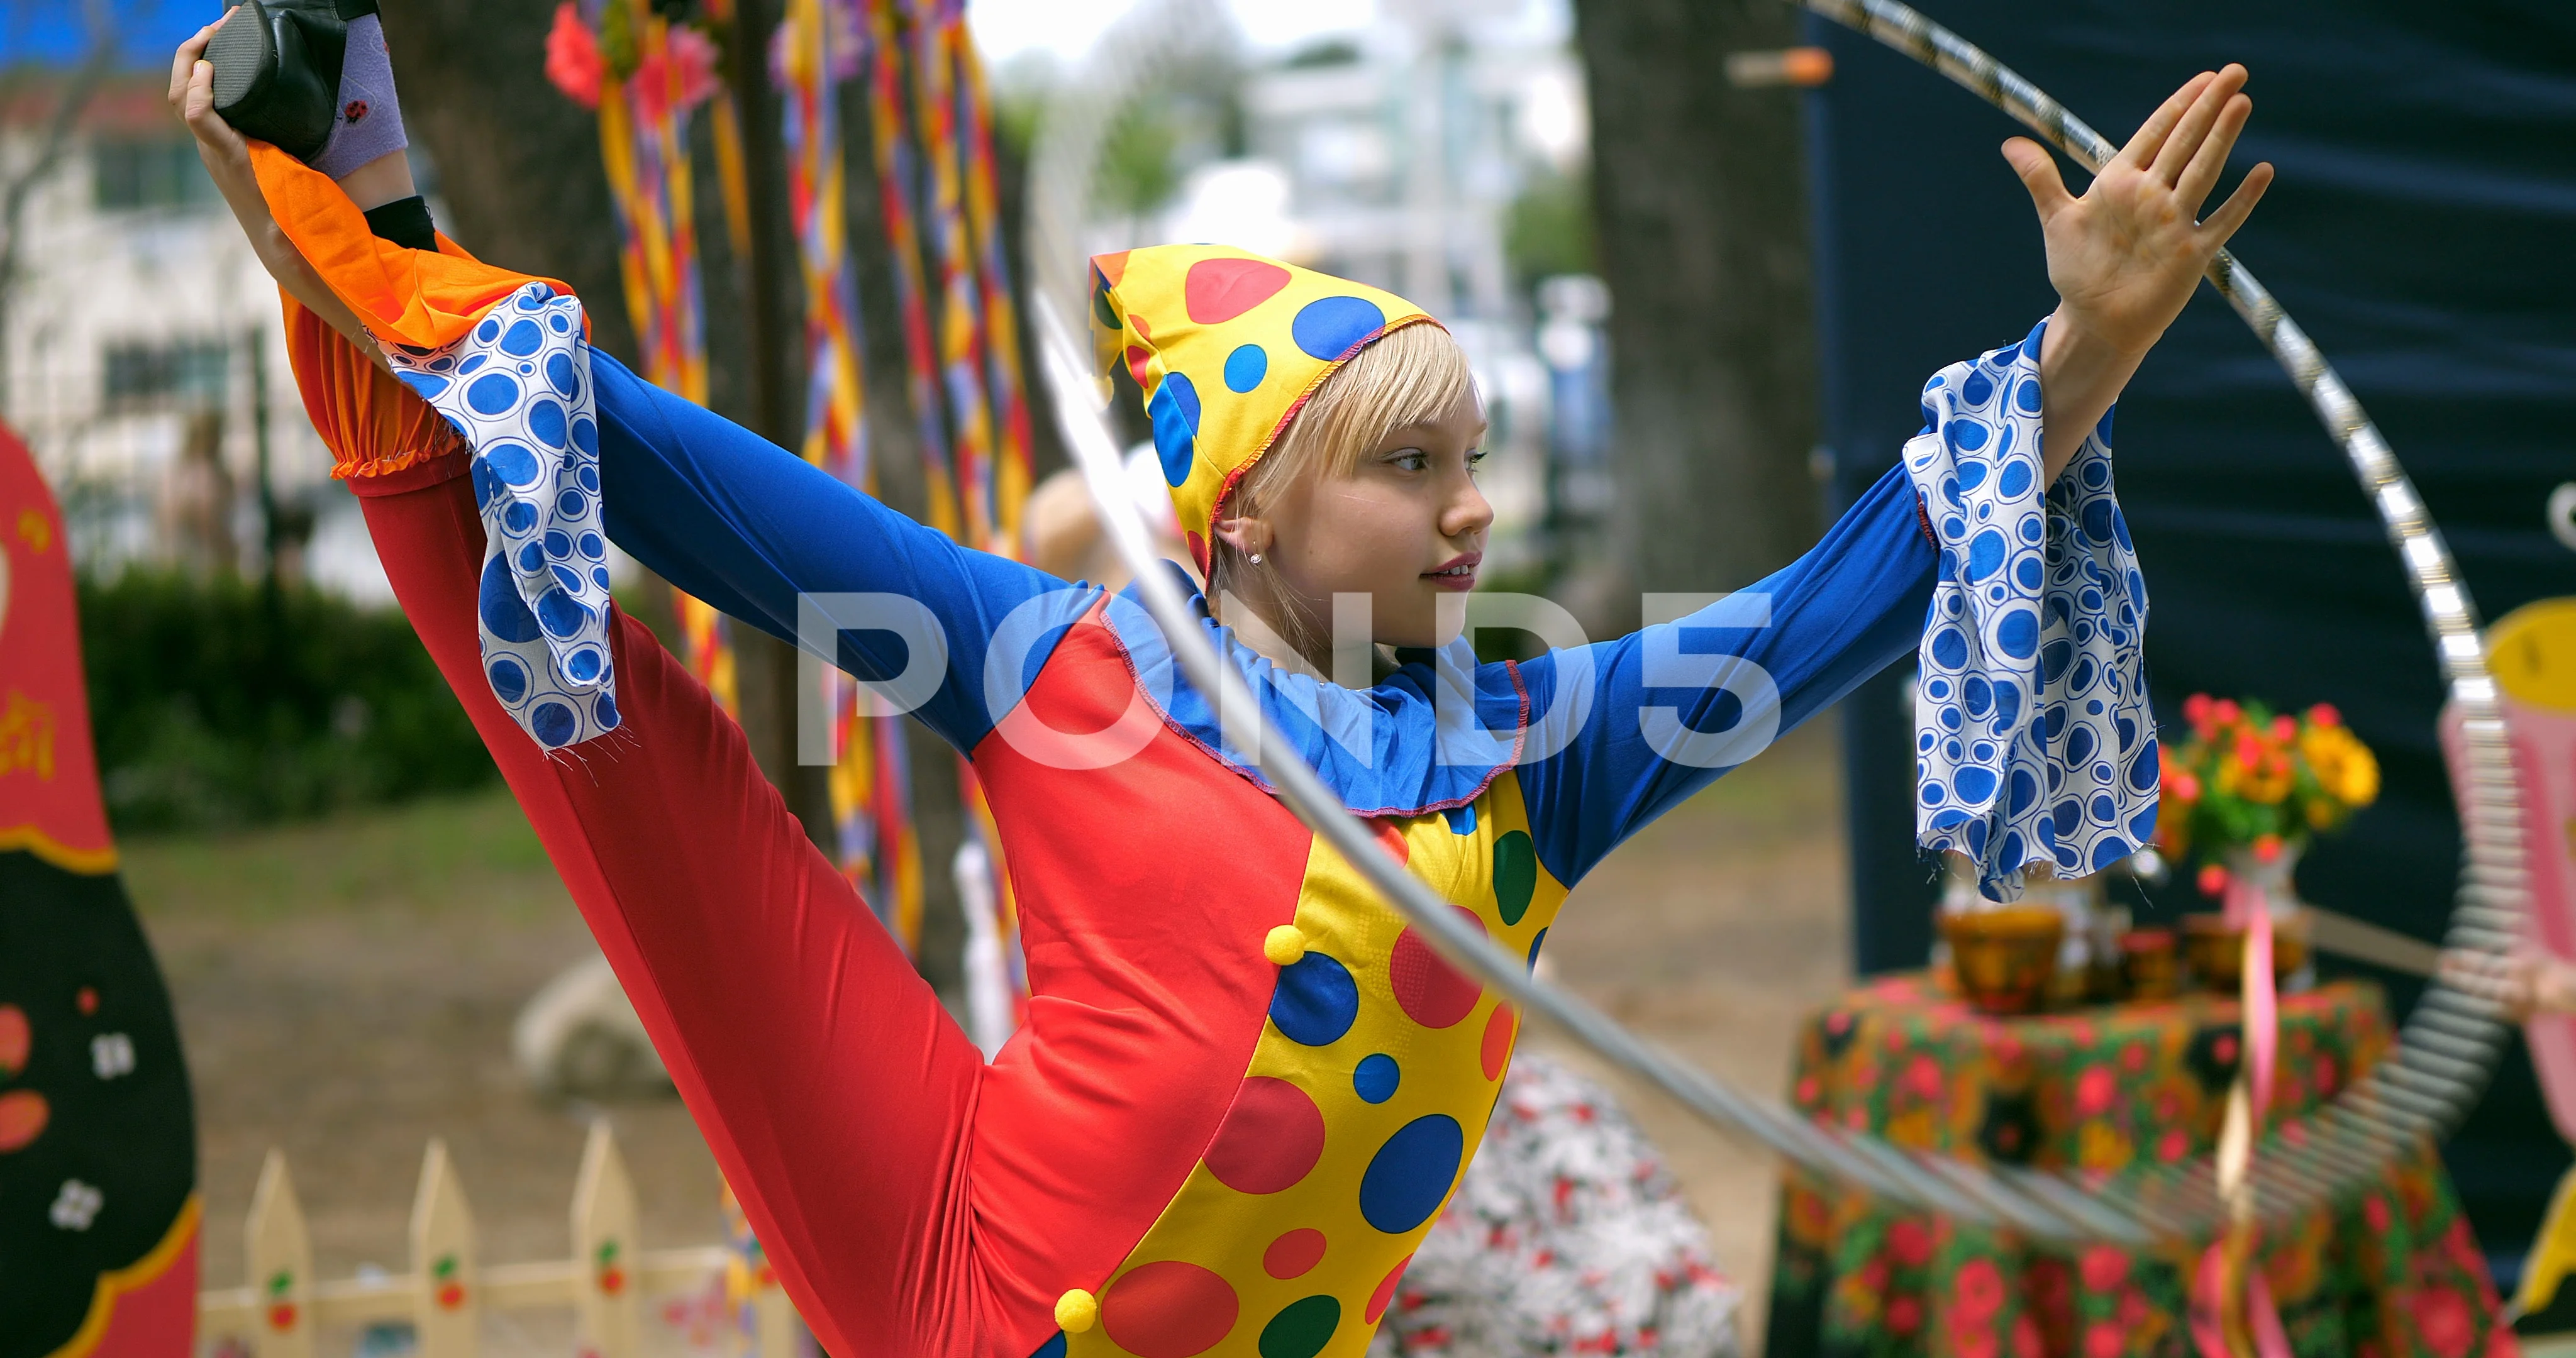 https://images.pond5.com/shapito-circus-clown-girl-performs-footage-106902921_prevstill.jpeg